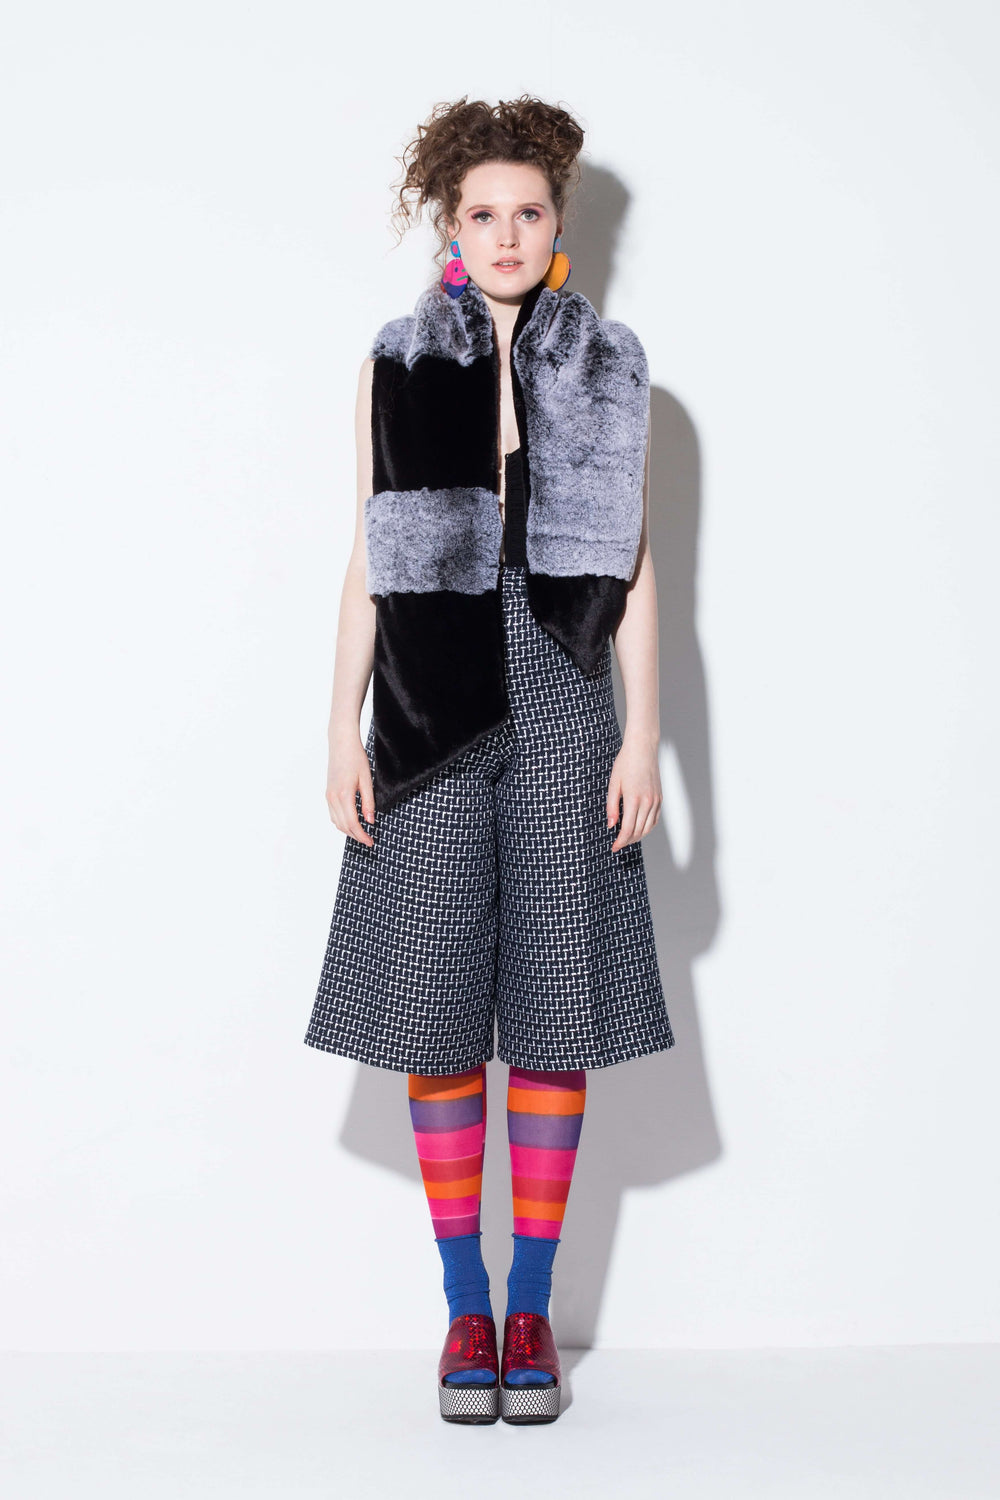 suitcase of memories| a fun faux fur scarf accessory in colour blocks from jin & yin styled with hand-pained tights